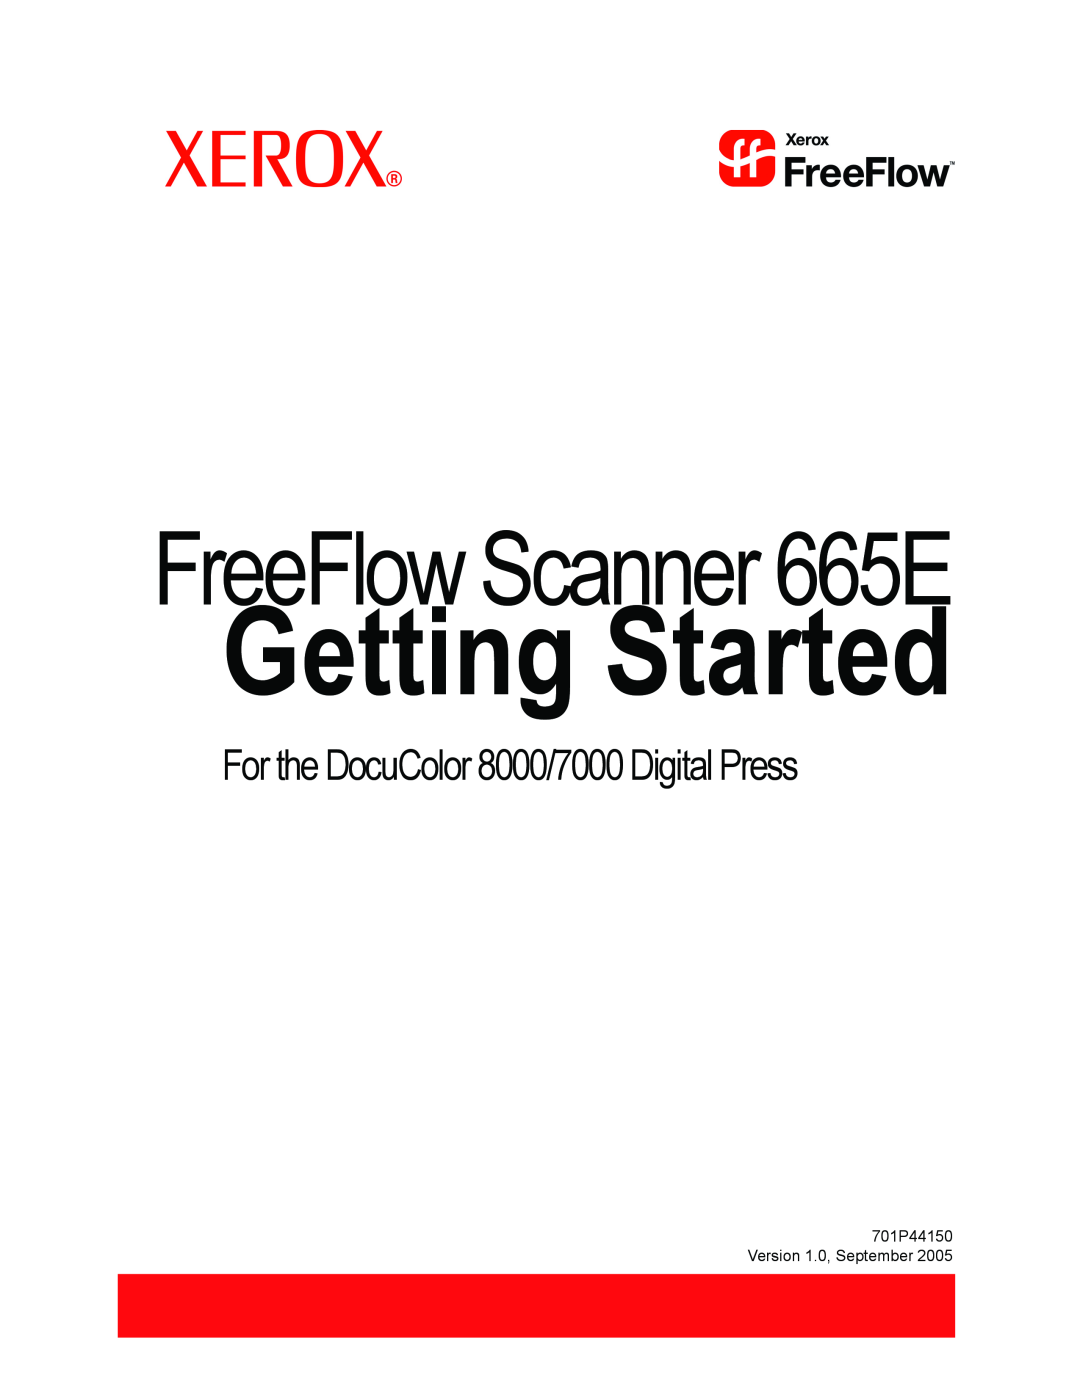 Xerox manual Getting Started, FreeFlow Scanner 665E, For the DocuColor 8000/7000 Digital Press 